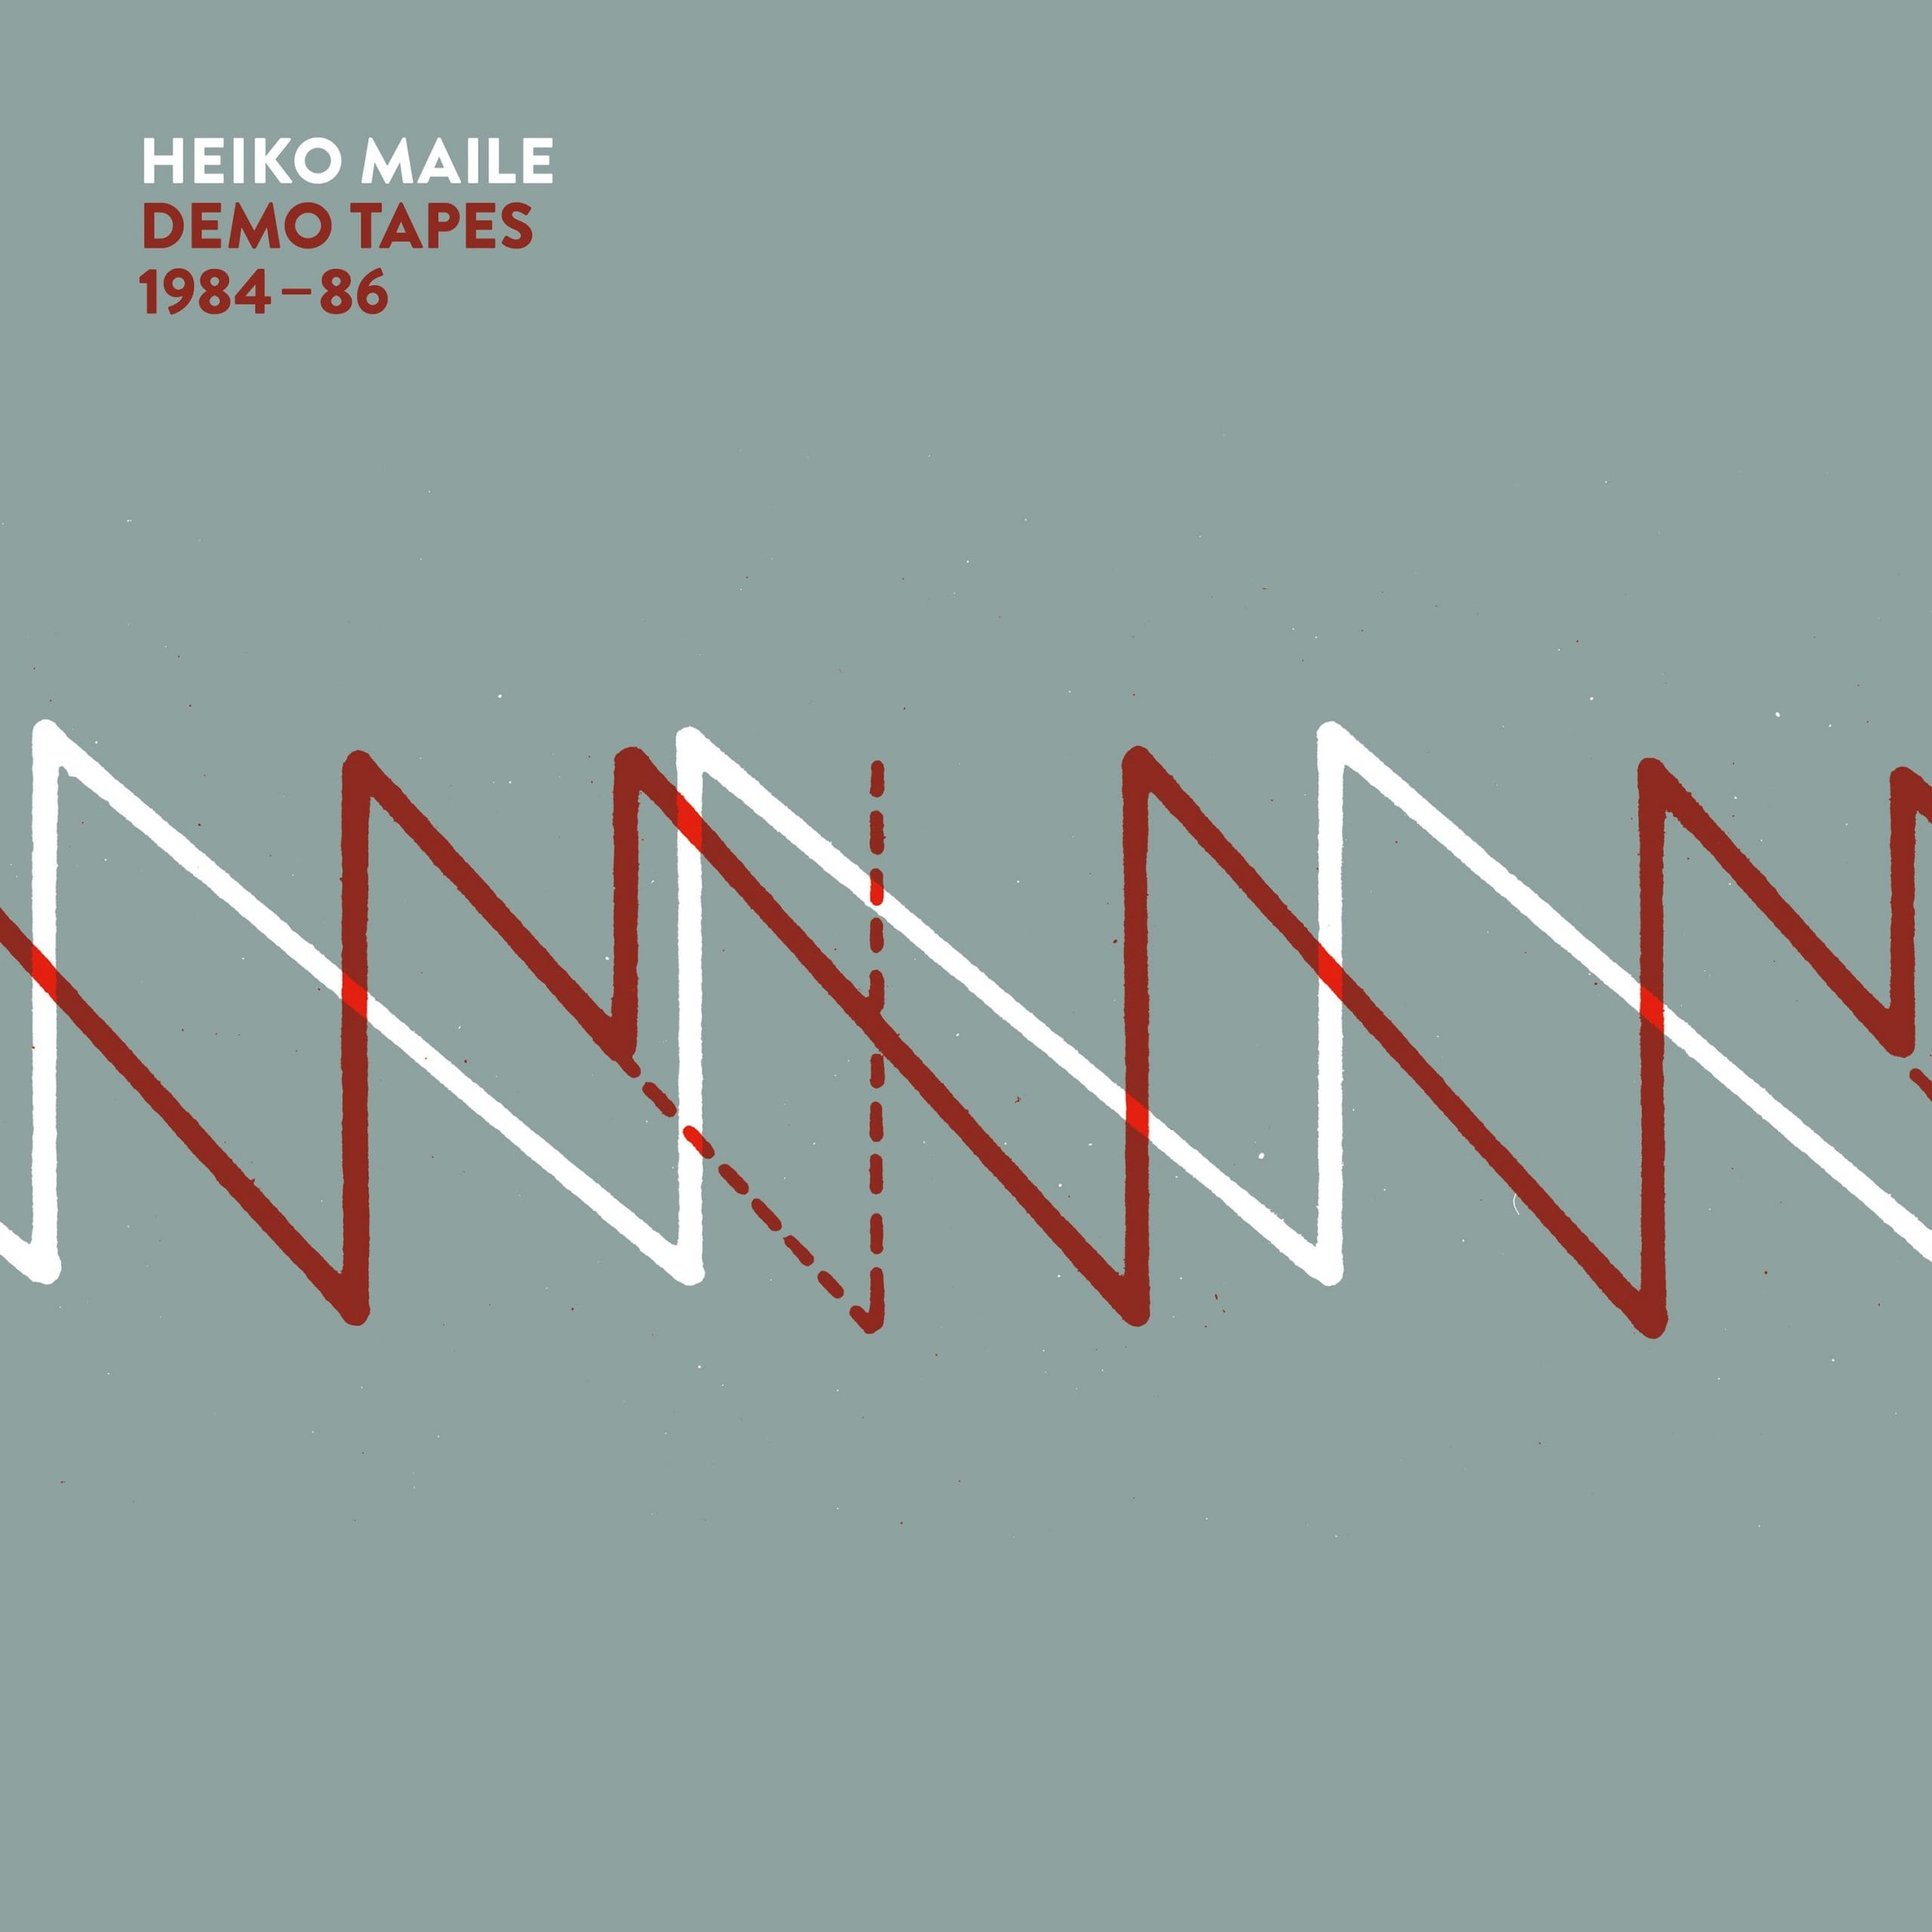 Pre-Camouflage material from the mid-eighties released - Heiko Maile demotapes to be released